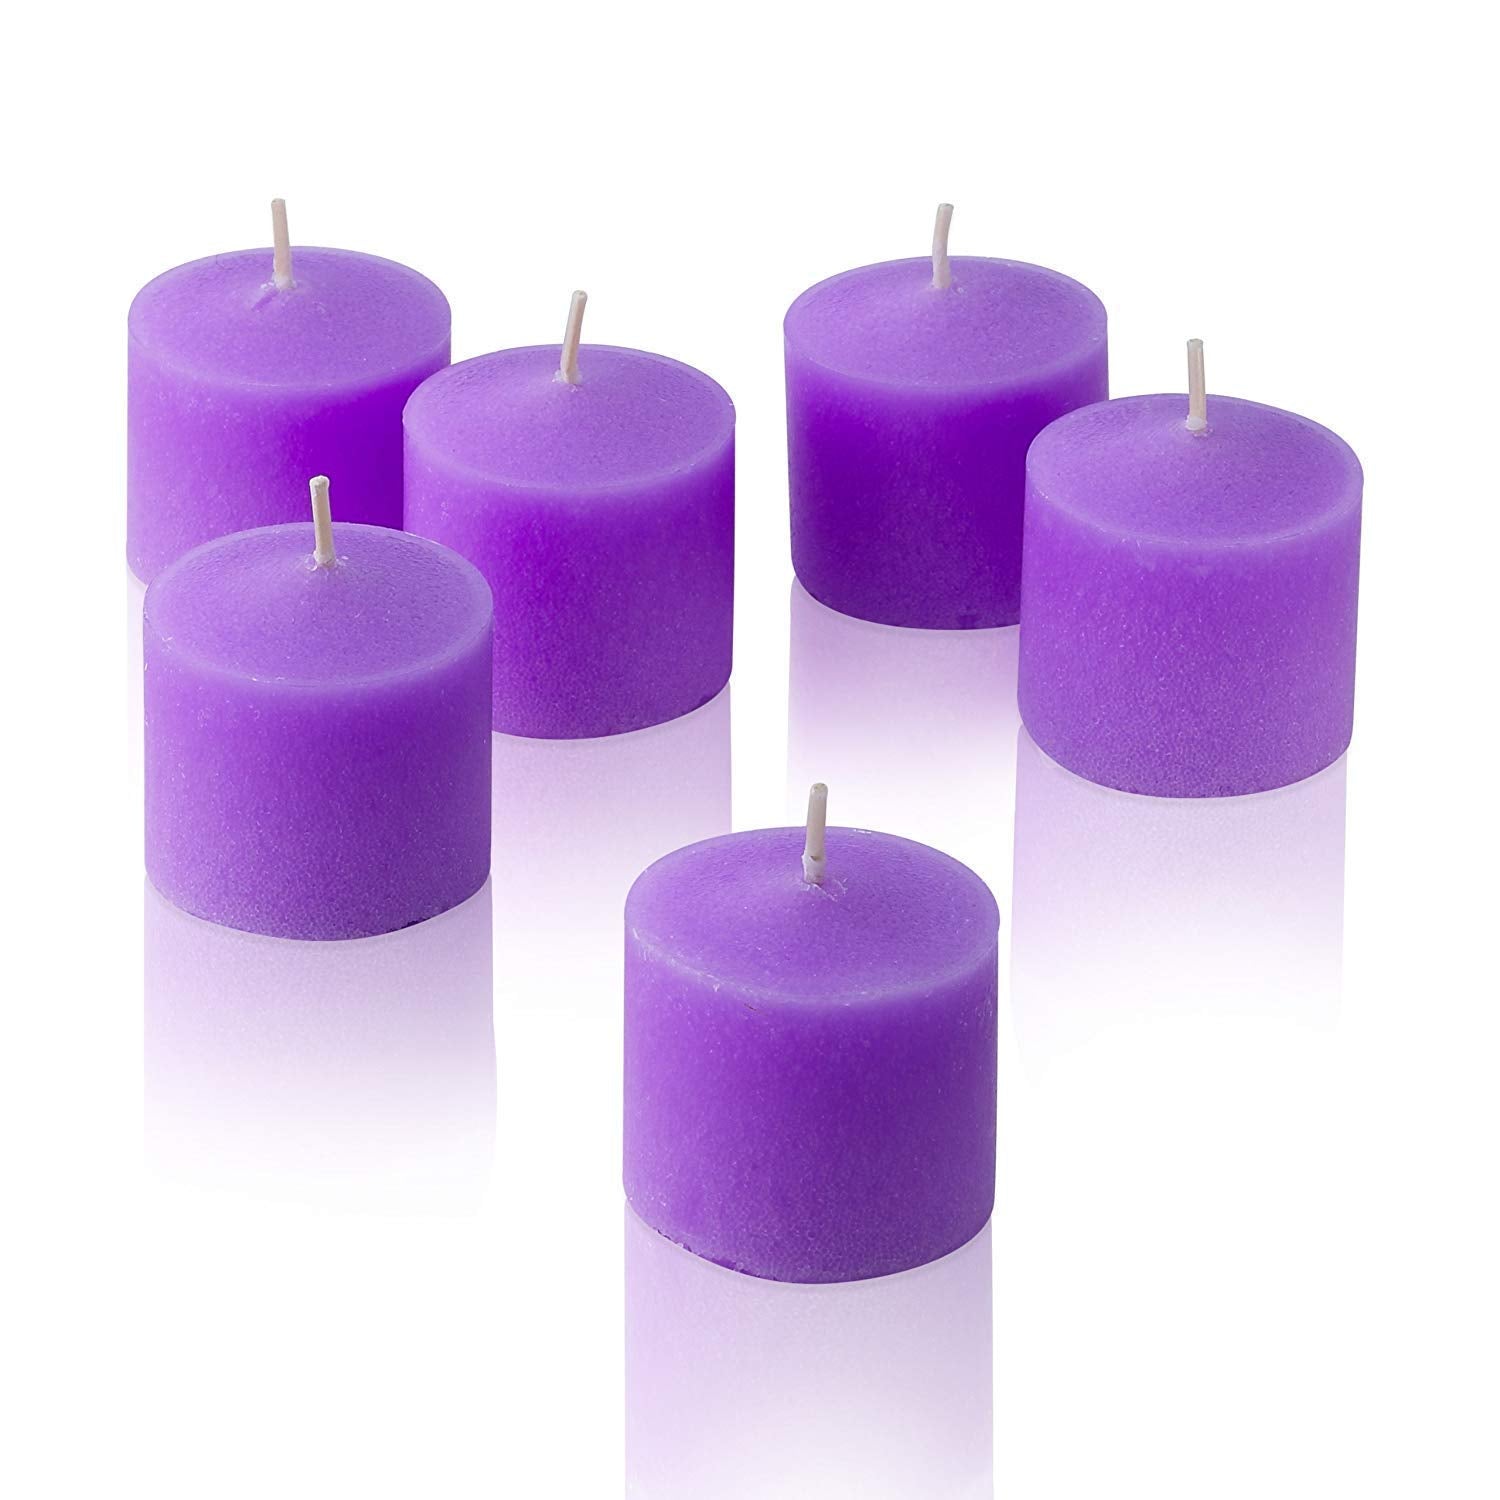 Votive Candles - Box of 12 Unscented Candles - 10 Hour Burn Time